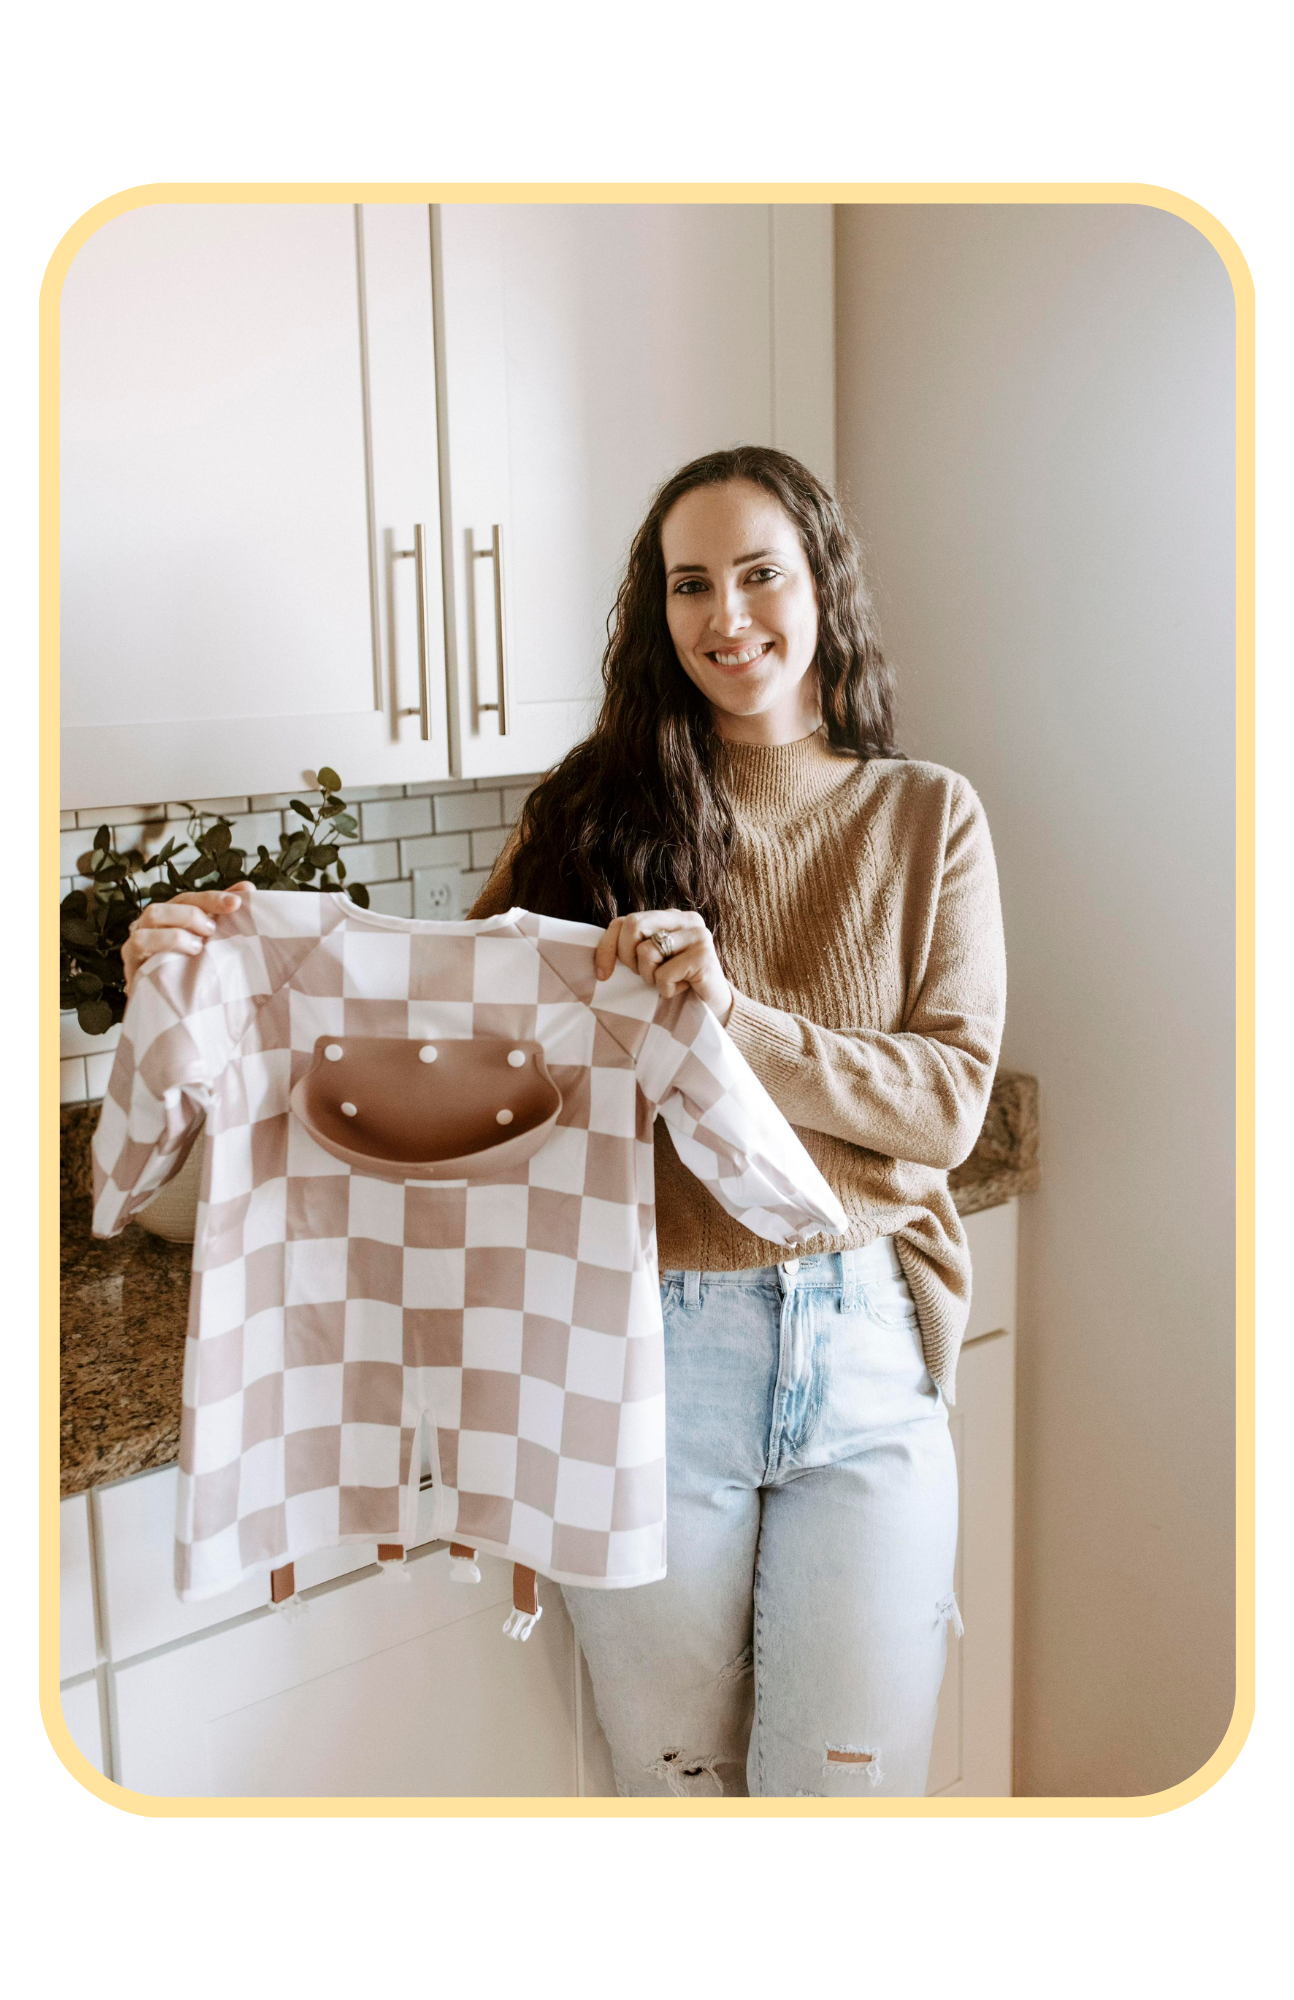 Danielle, the founder of Bibvy, smiling and holding an mauve pink and white checkered bib in a modern kitchen setting.